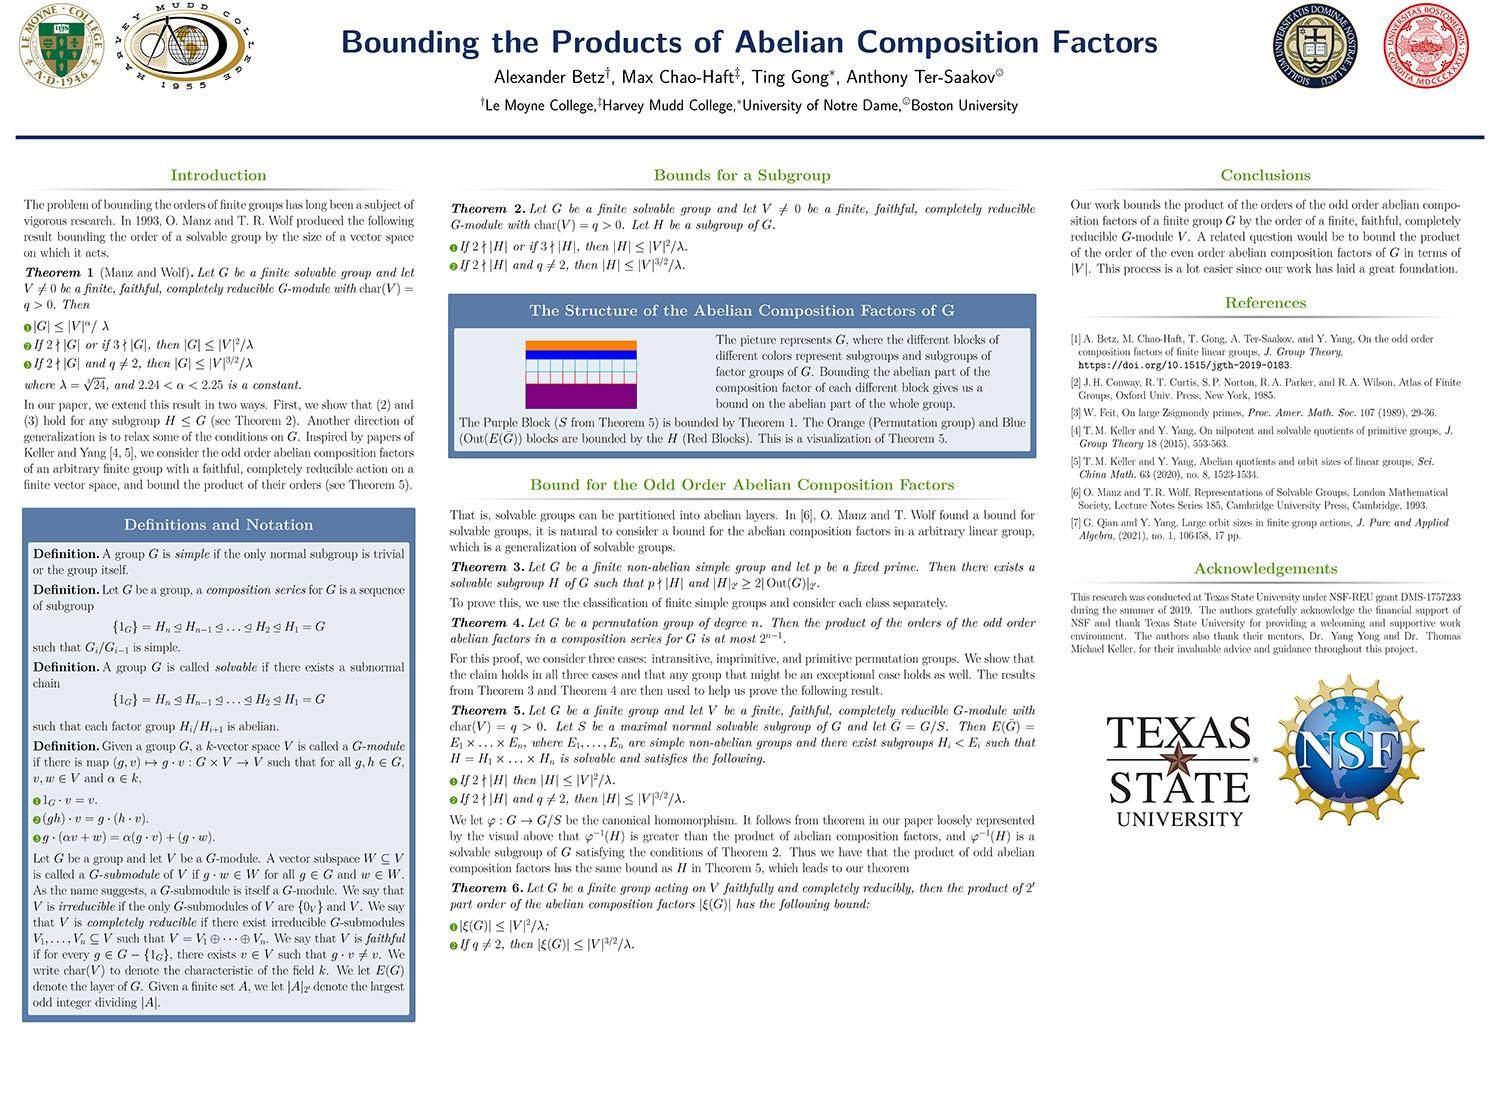 Bounding Products of Abelian Composition Factors